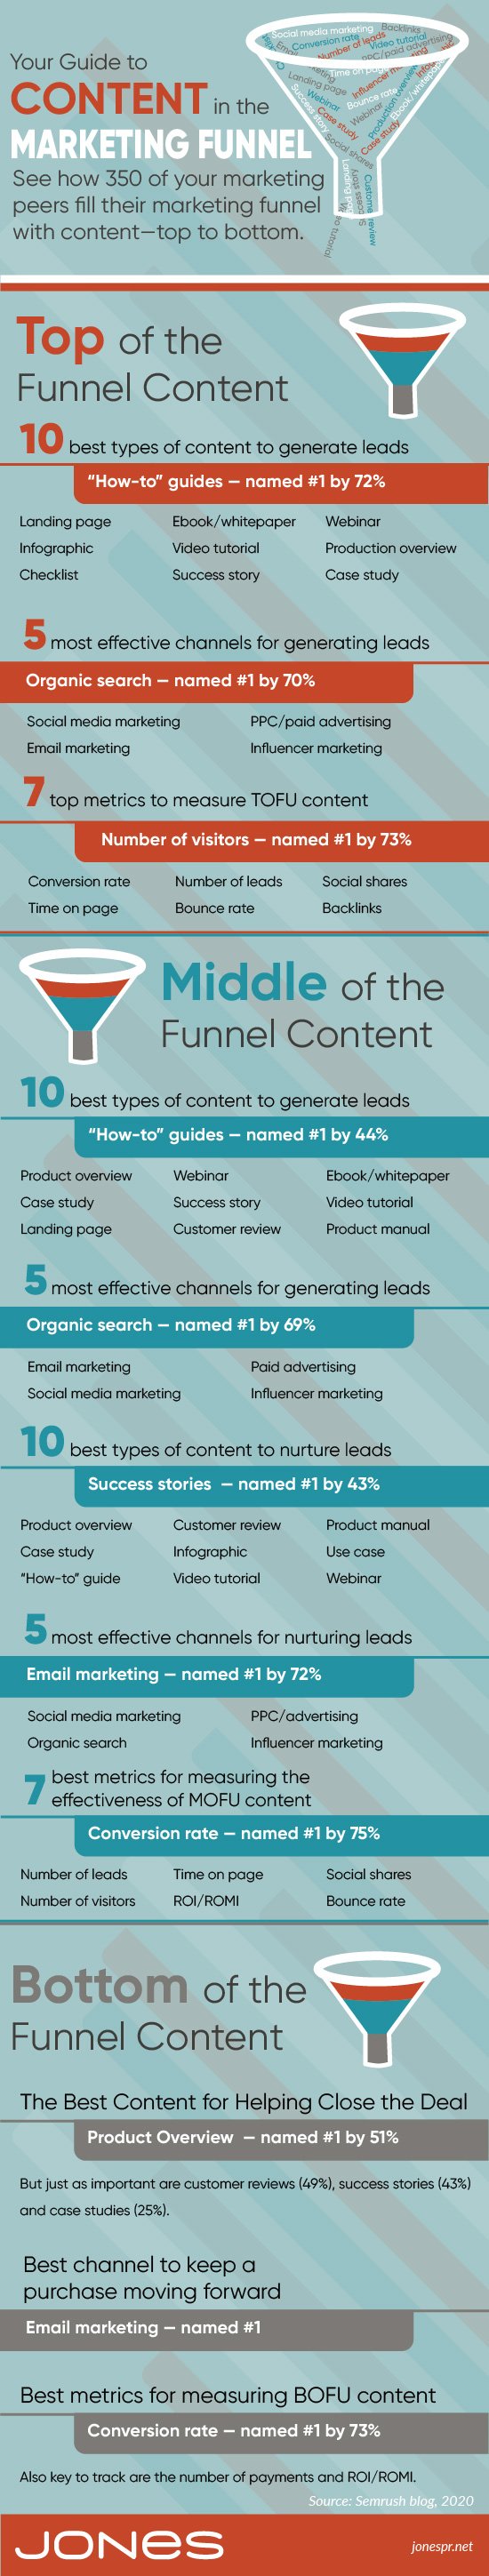 November 21 Infographic - Your Guide to Content Markerting Funnel-01-01